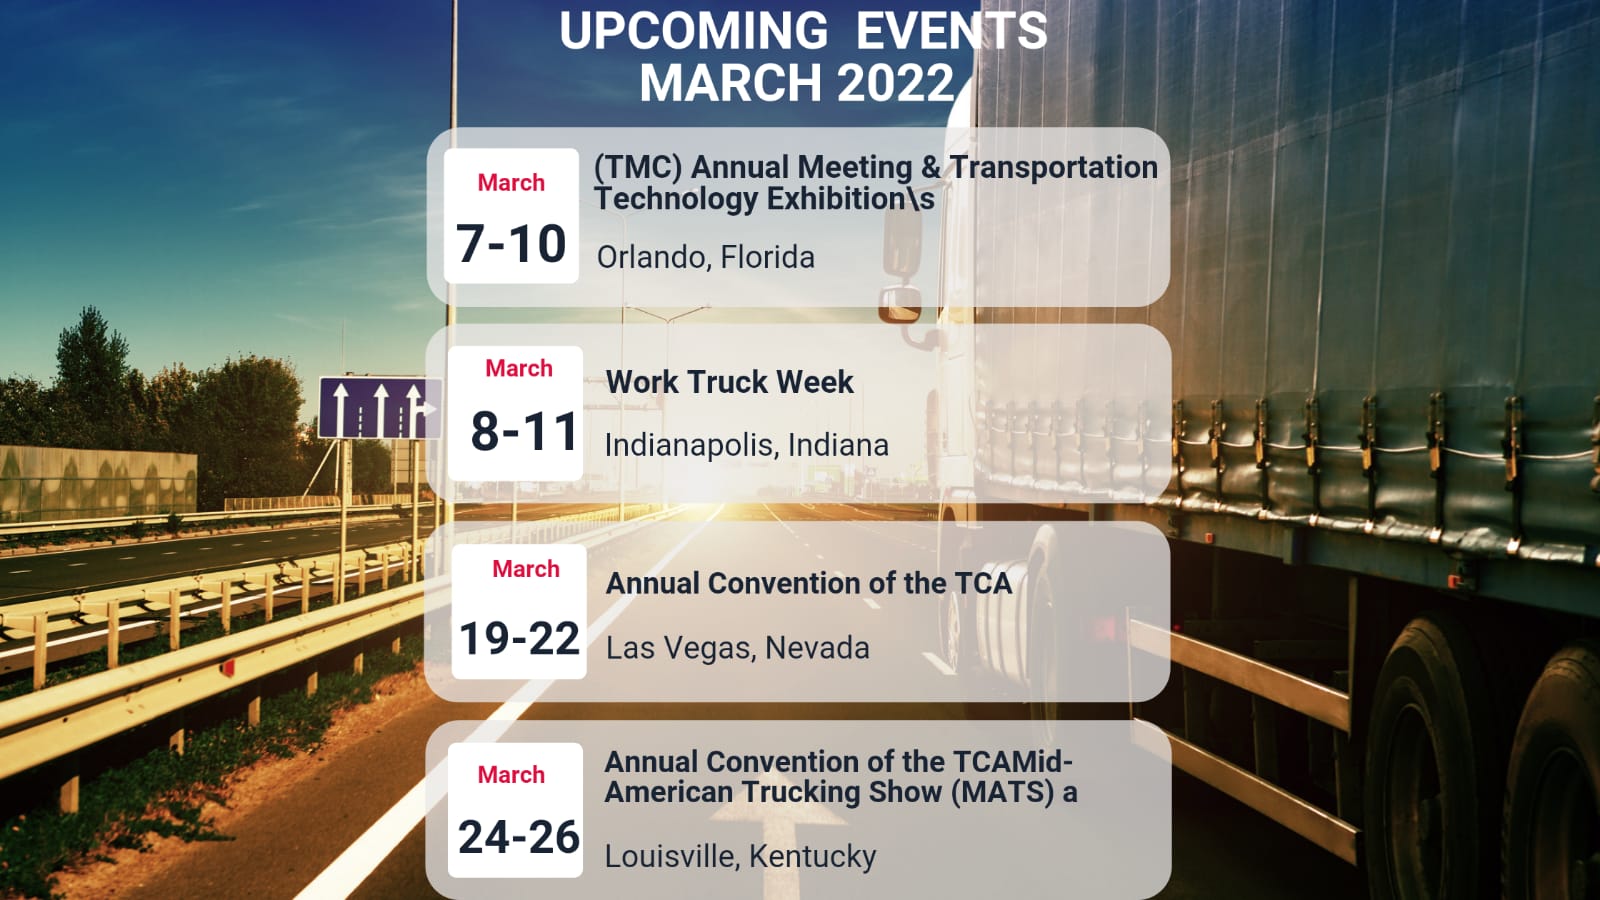 Upcoming Trucking Conferences and Trade Shows - March 2022